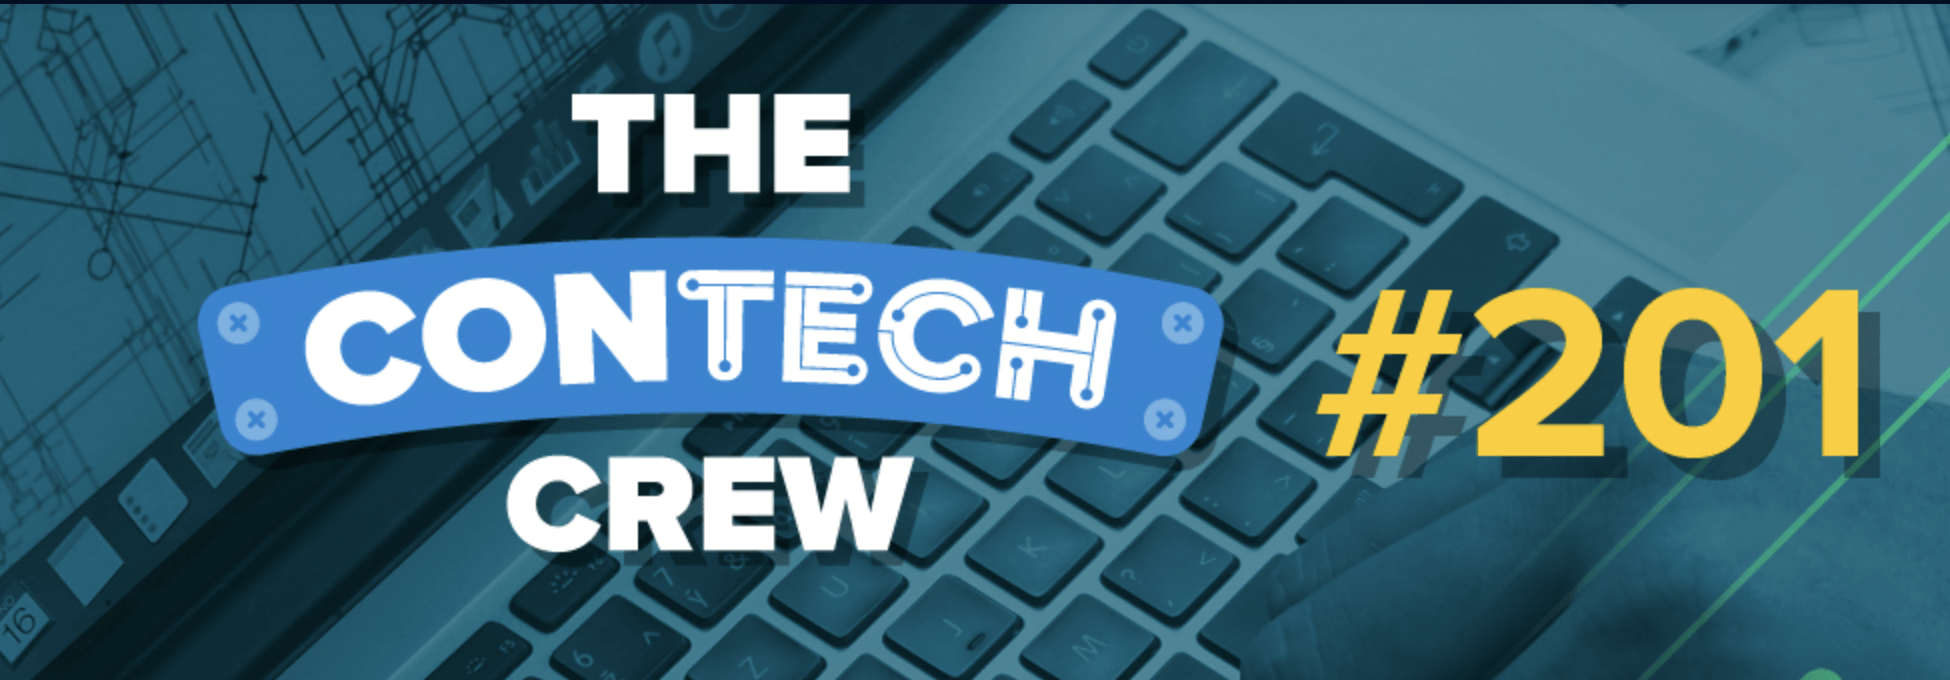 Fun PodCast Episode with The ConTechCrew featuring our CEO Matt Wagoner.